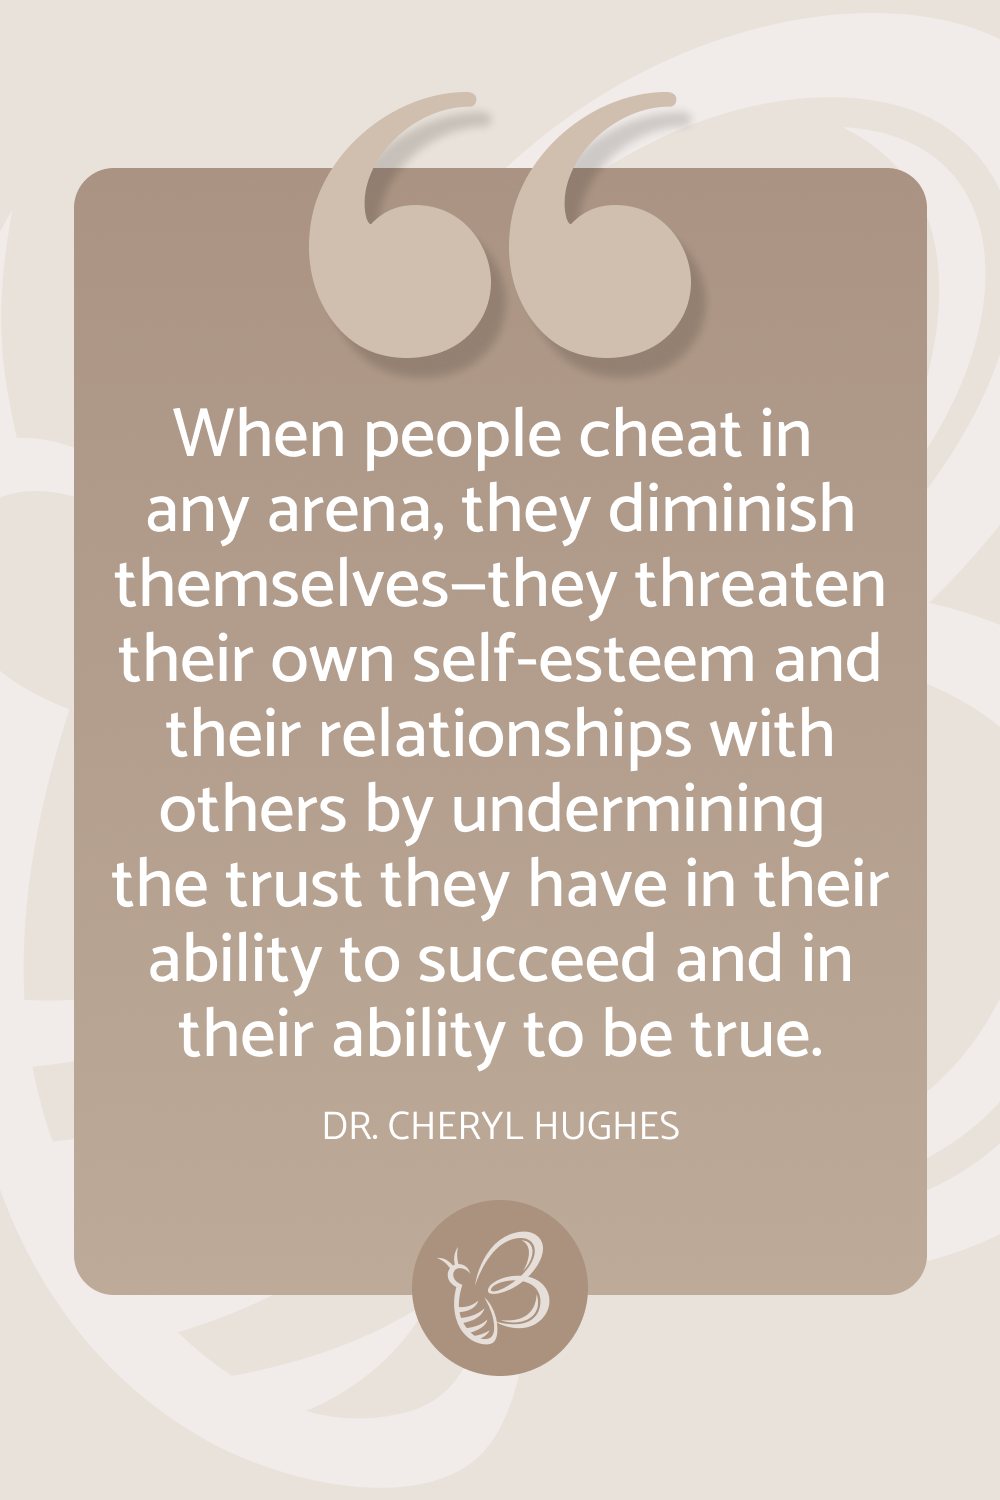 When people cheat in any arena, they diminish themselves—they threaten their own self esteem and their relationships